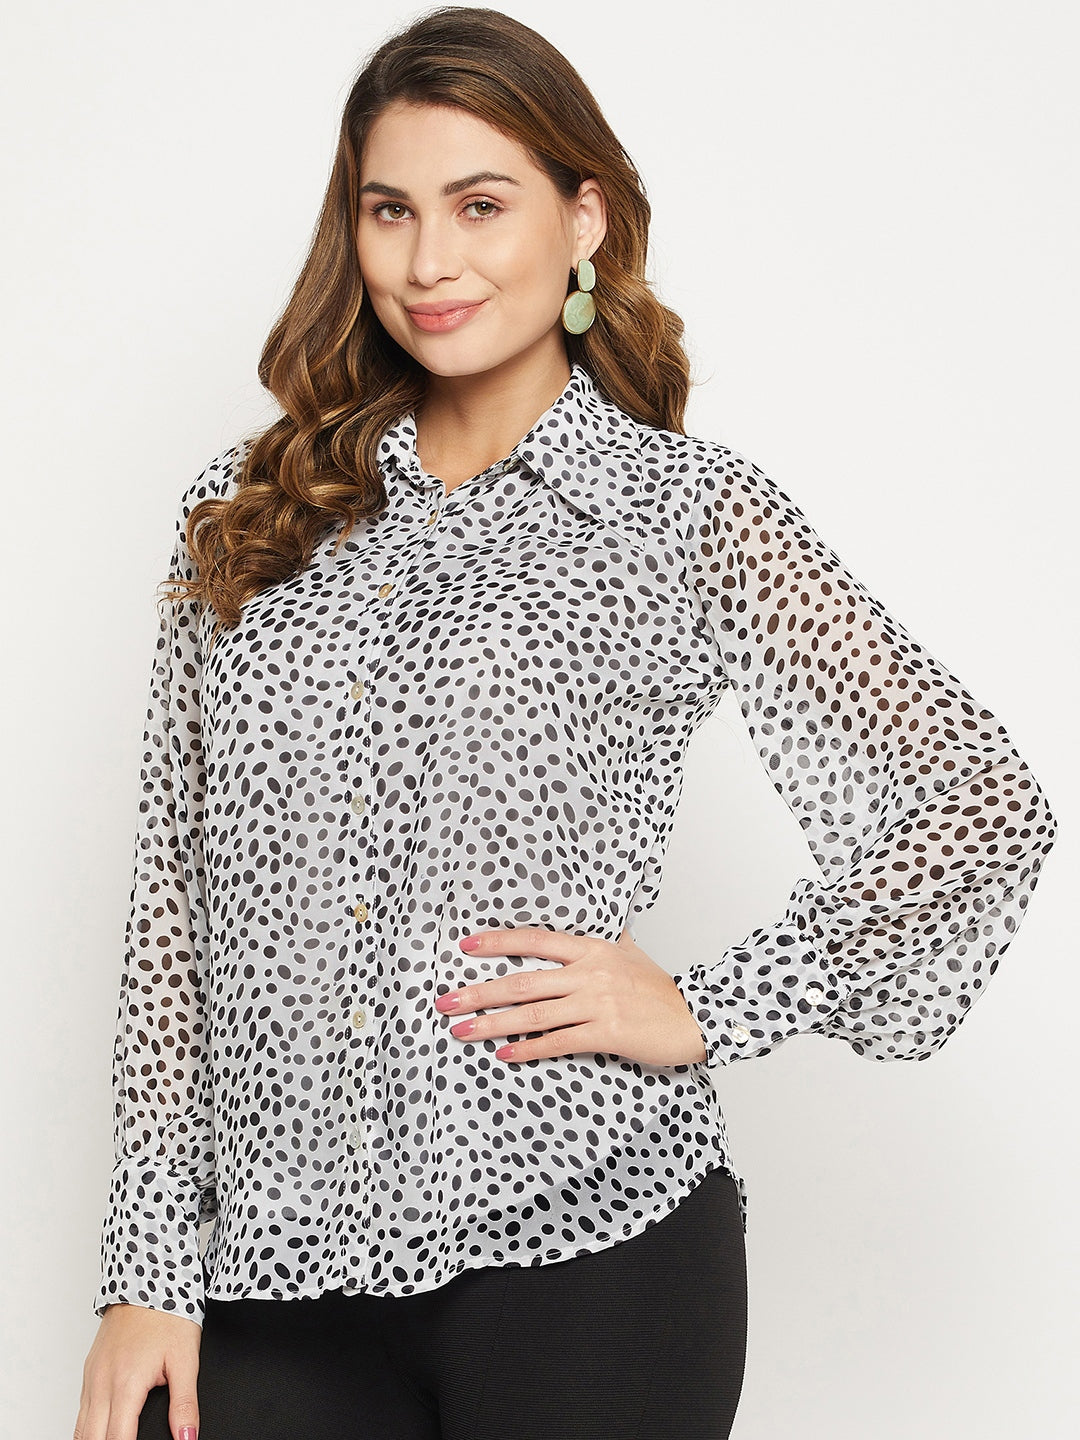 Relaxed Button Cuff Printed Georgette Casual Shirt